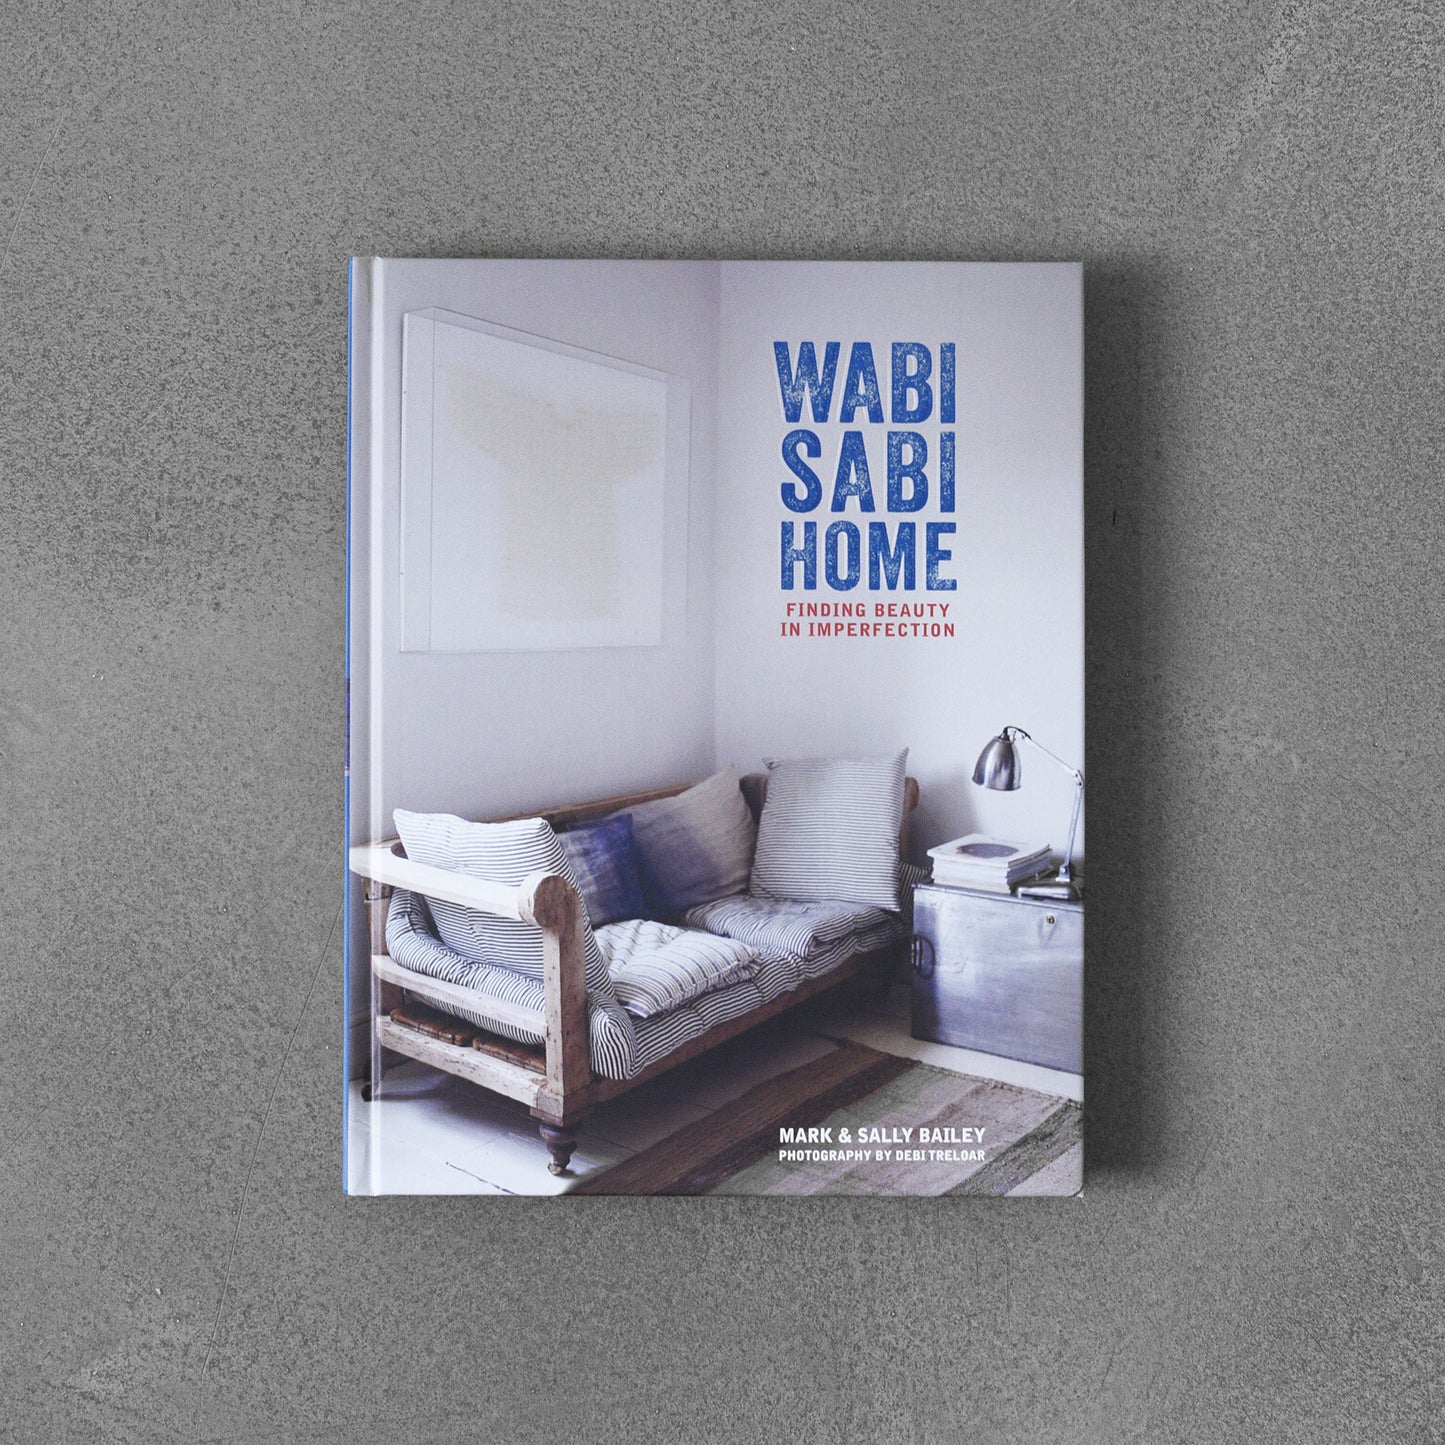 Wabi Sabi Home: Finding Beauty in Imperfection